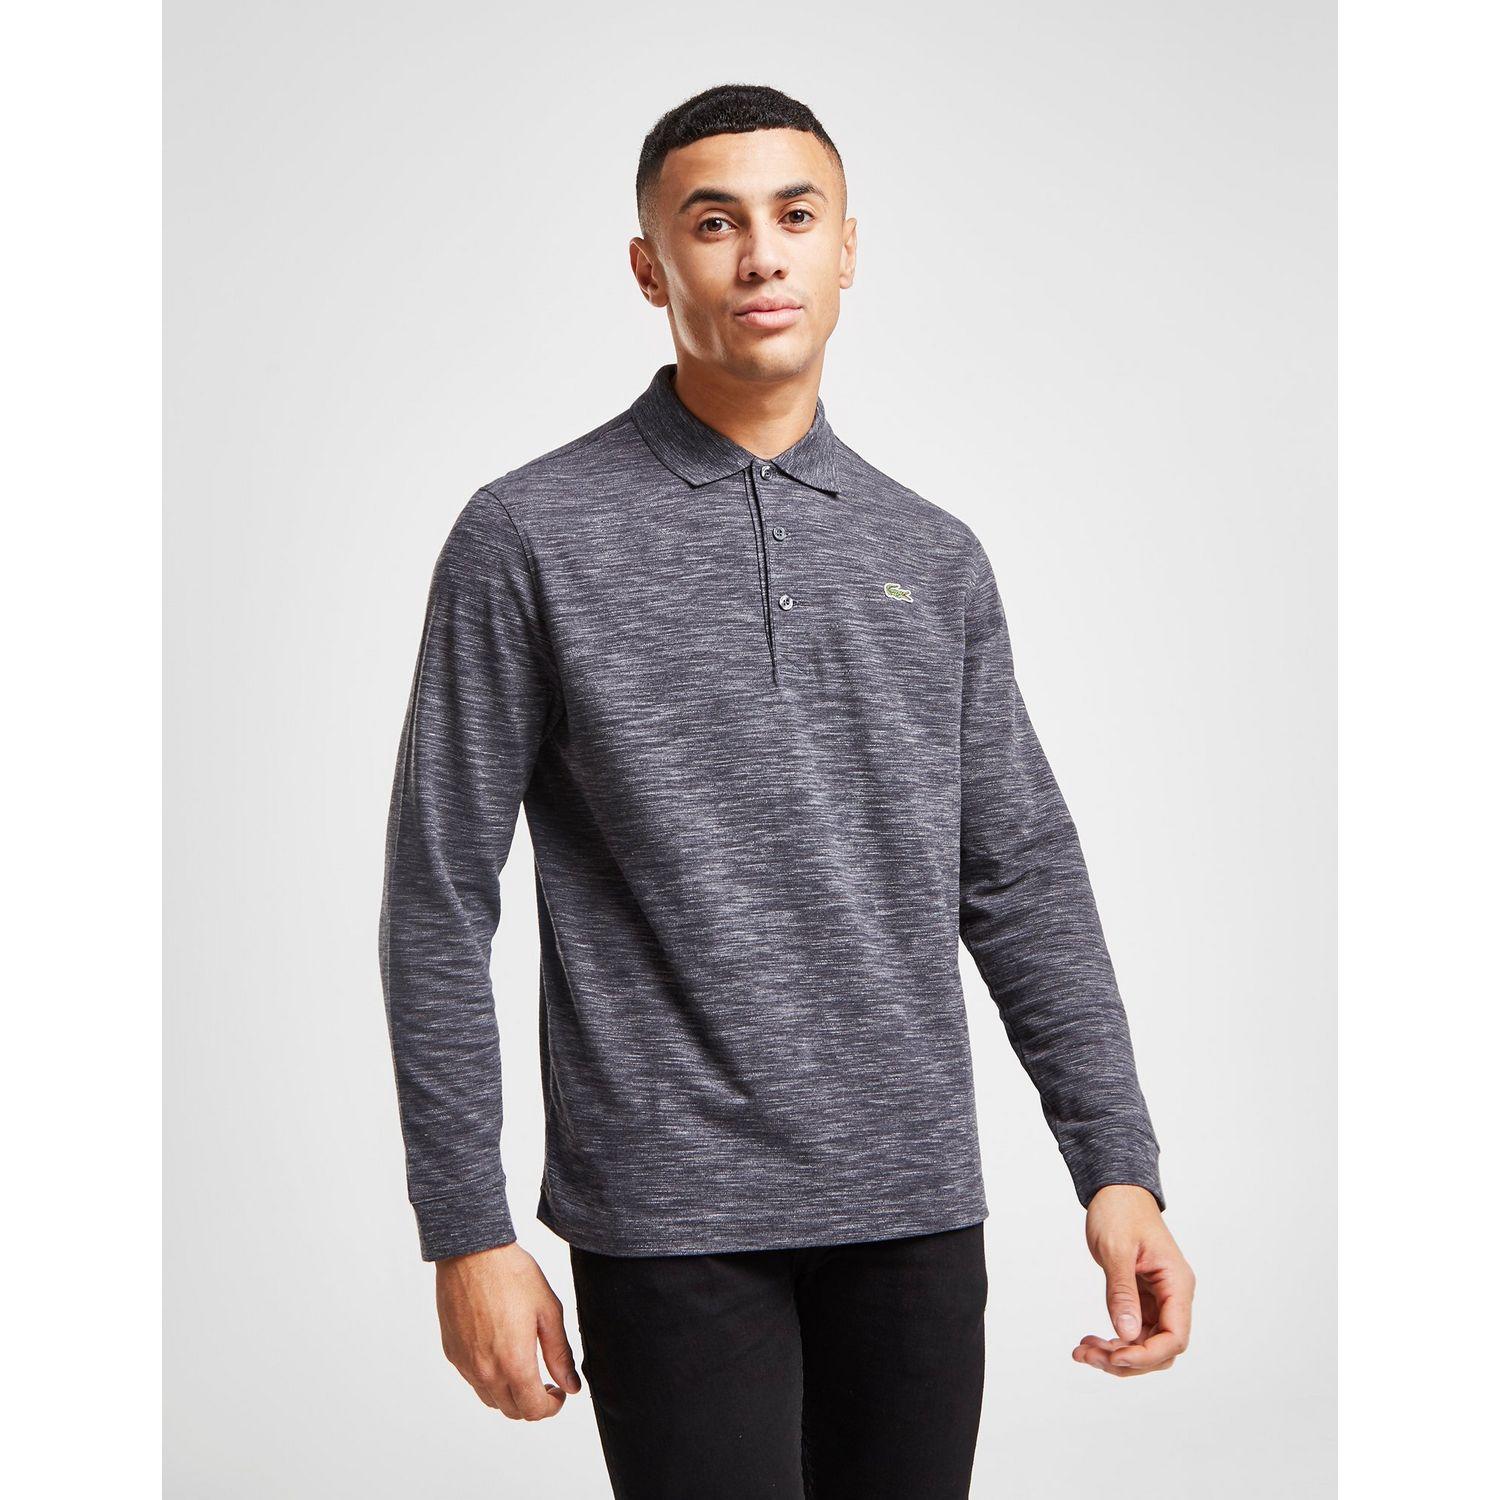 Lacoste Alligator Long Sleeve Polo Shirt in Gray for Men - Lyst